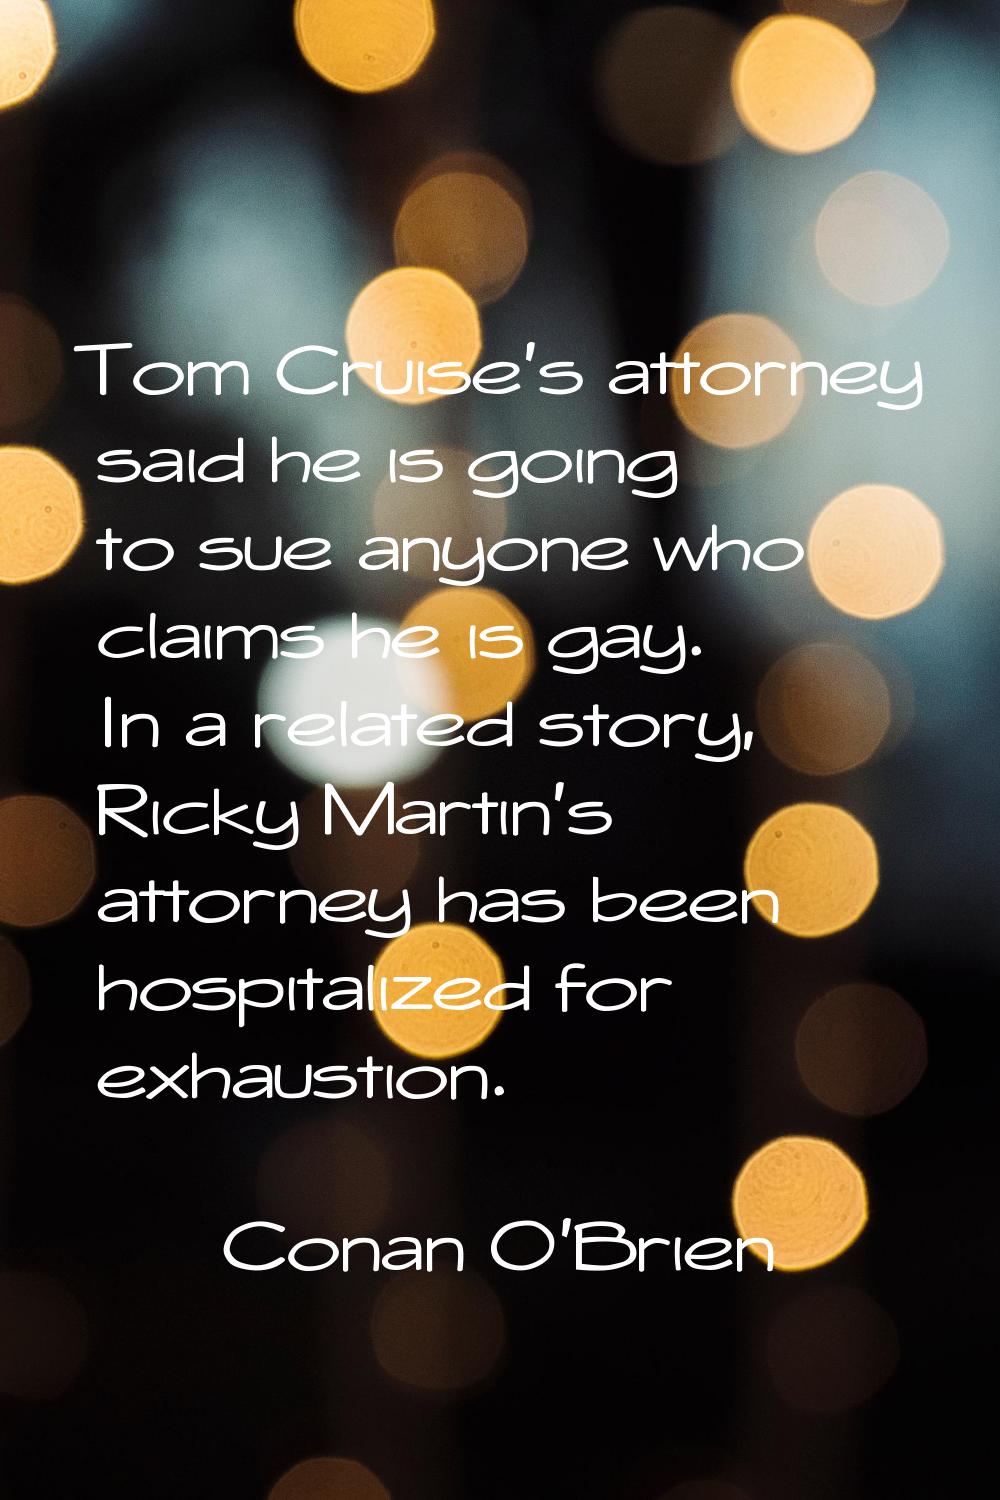 Tom Cruise's attorney said he is going to sue anyone who claims he is gay. In a related story, Rick